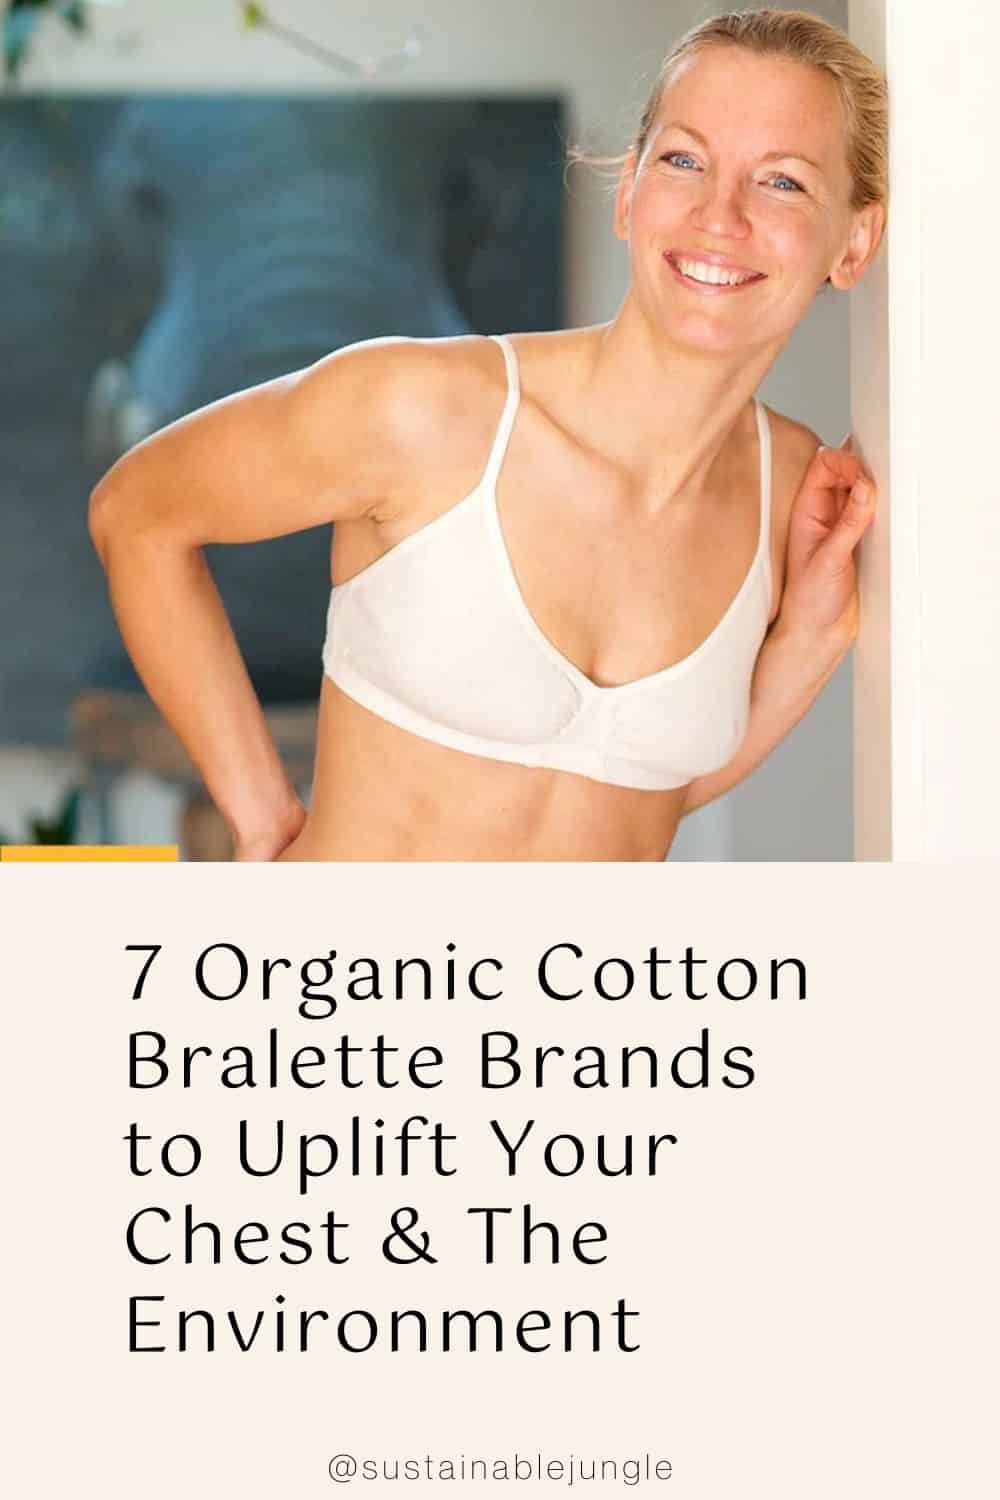 7 Organic Cotton Bralette Brands to Uplift Your Chest & The Environment Image by Rawganique #organiccottonbralette #organiccottonbralettes #wirelessorganiccottonbralettes #organicbralettes #sustainablebralettes #wirelessorganiccottonbralette #sustainablejungle